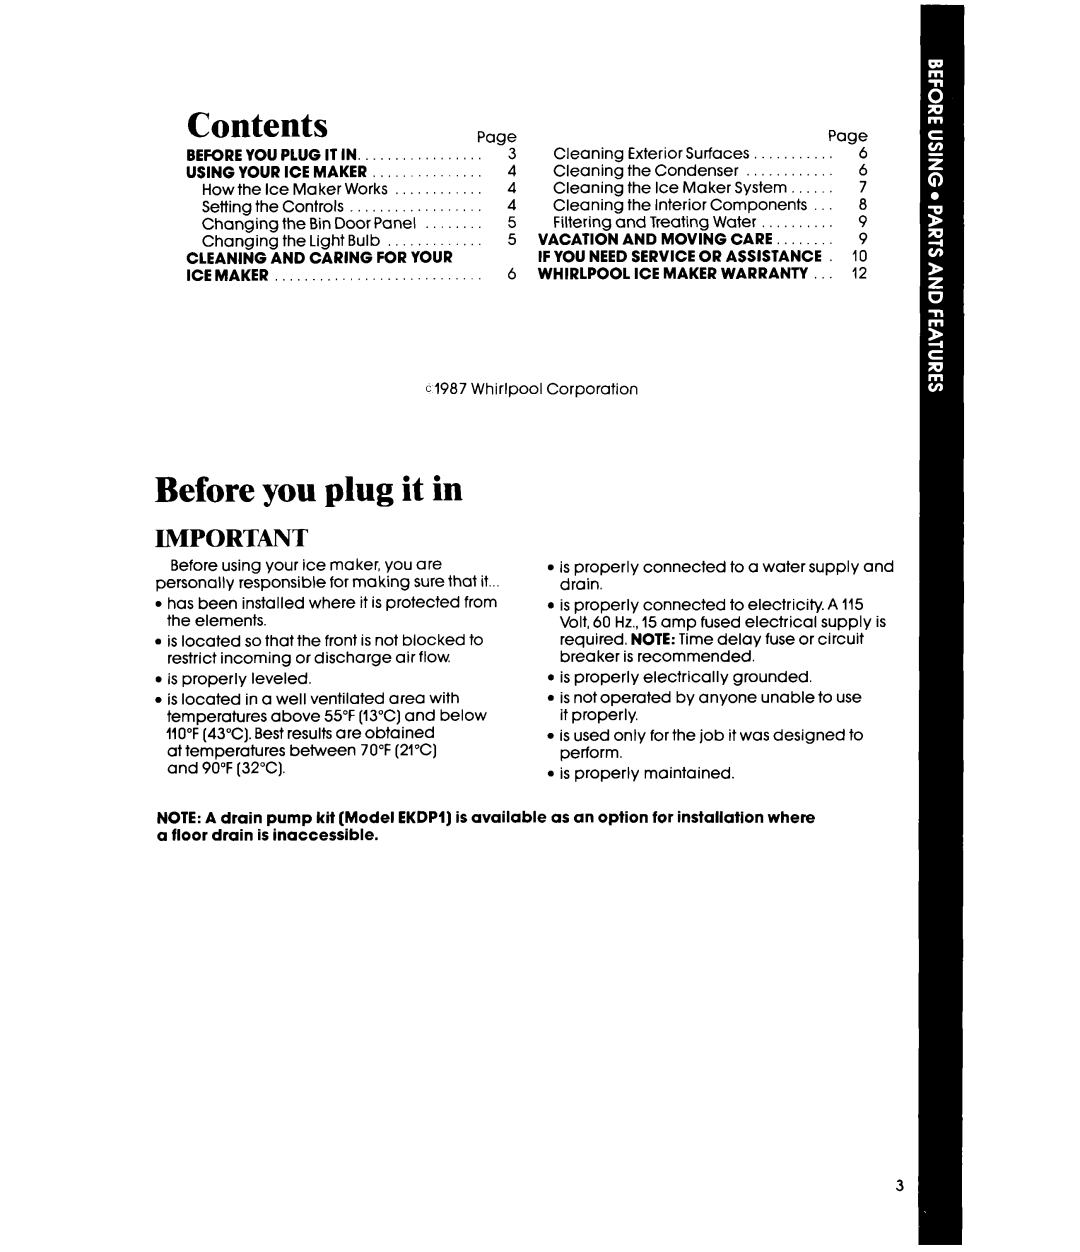 Whirlpool EC5100 manual Contents, Before you plug it in 